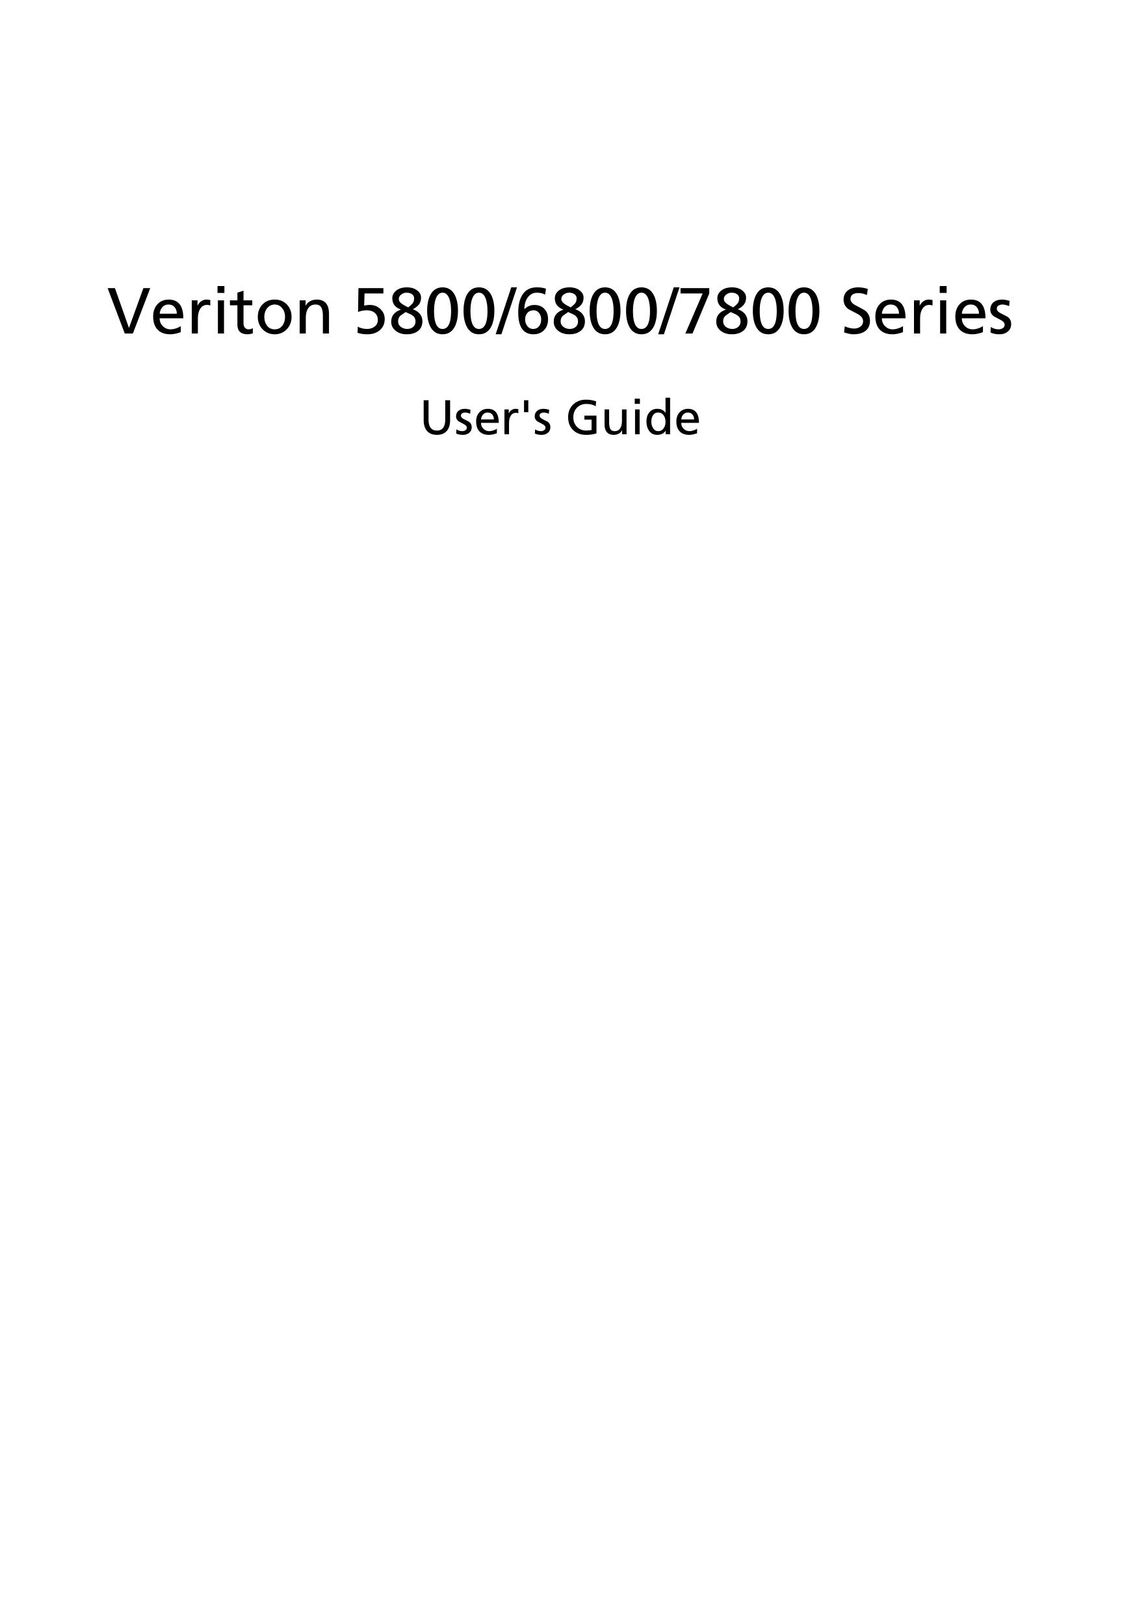 Acer 6800 Series Personal Computer User Manual